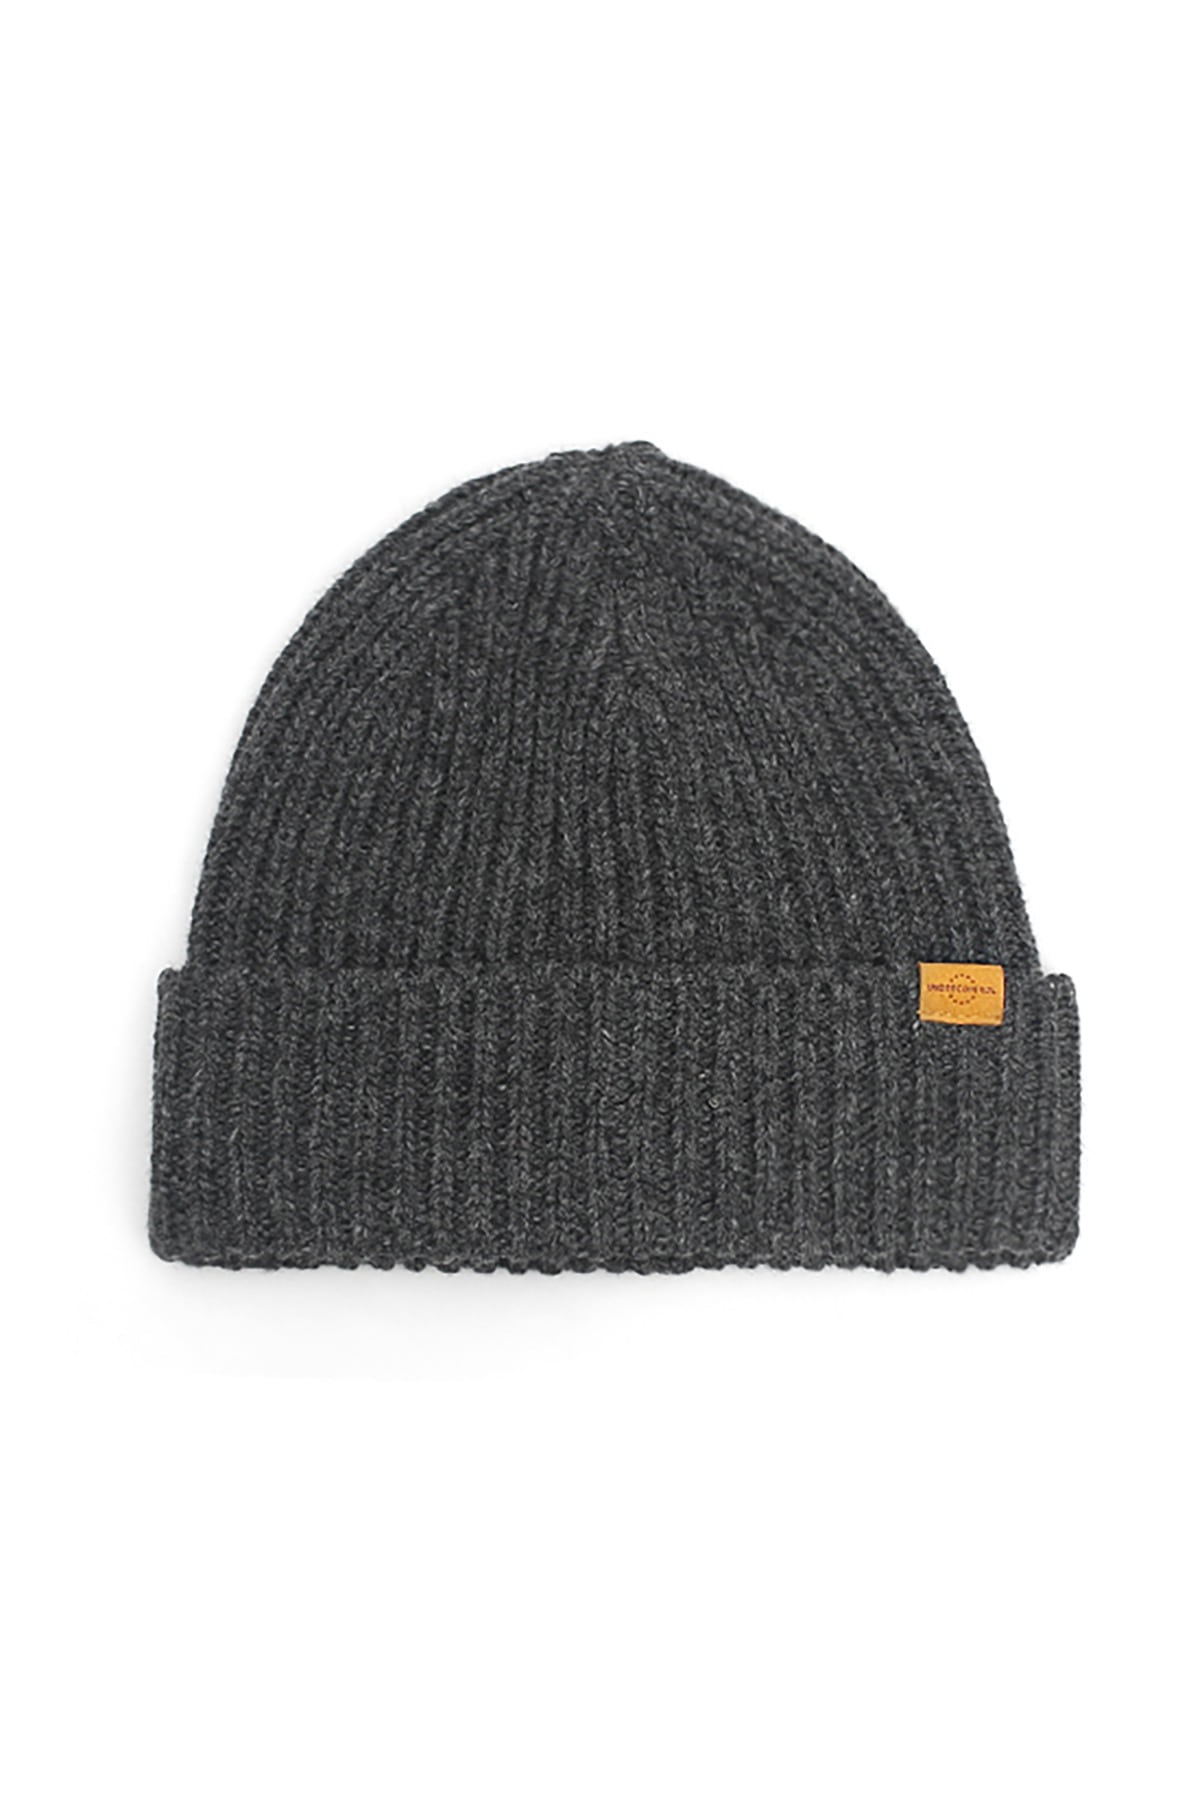 BEANIE / JUST FIT / WOOL / CHARCOAL GREY (BOX PACKAGE)